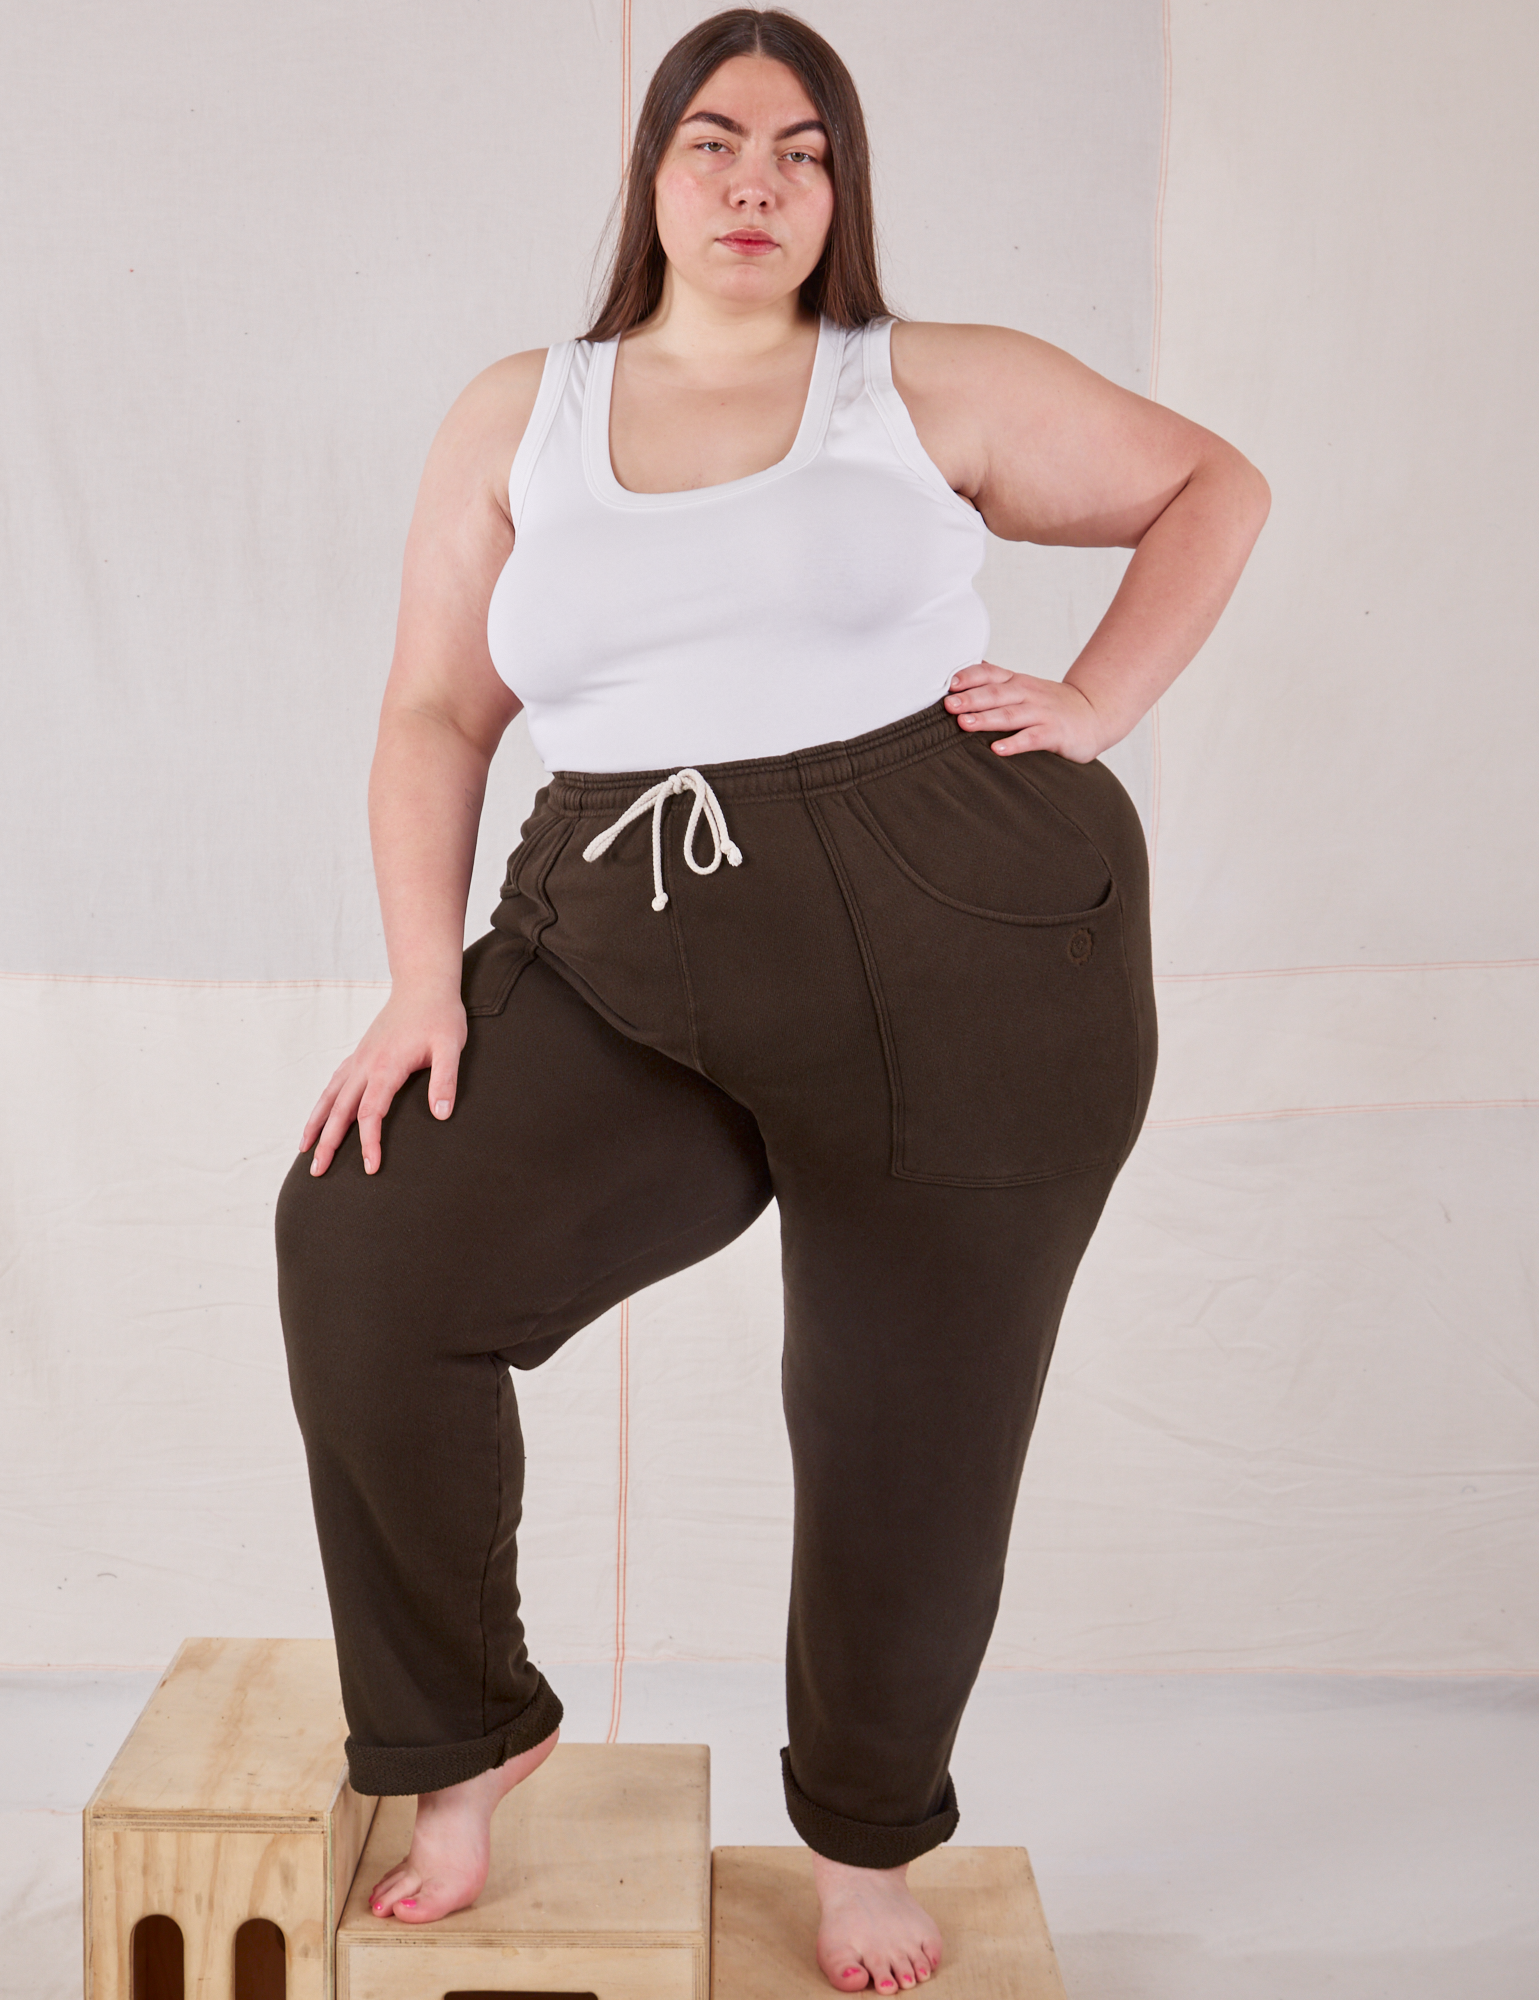 Marielena is wearing Rolled Cuff Sweat Pants in Espresso Brown and vintage off-white Cropped Tank